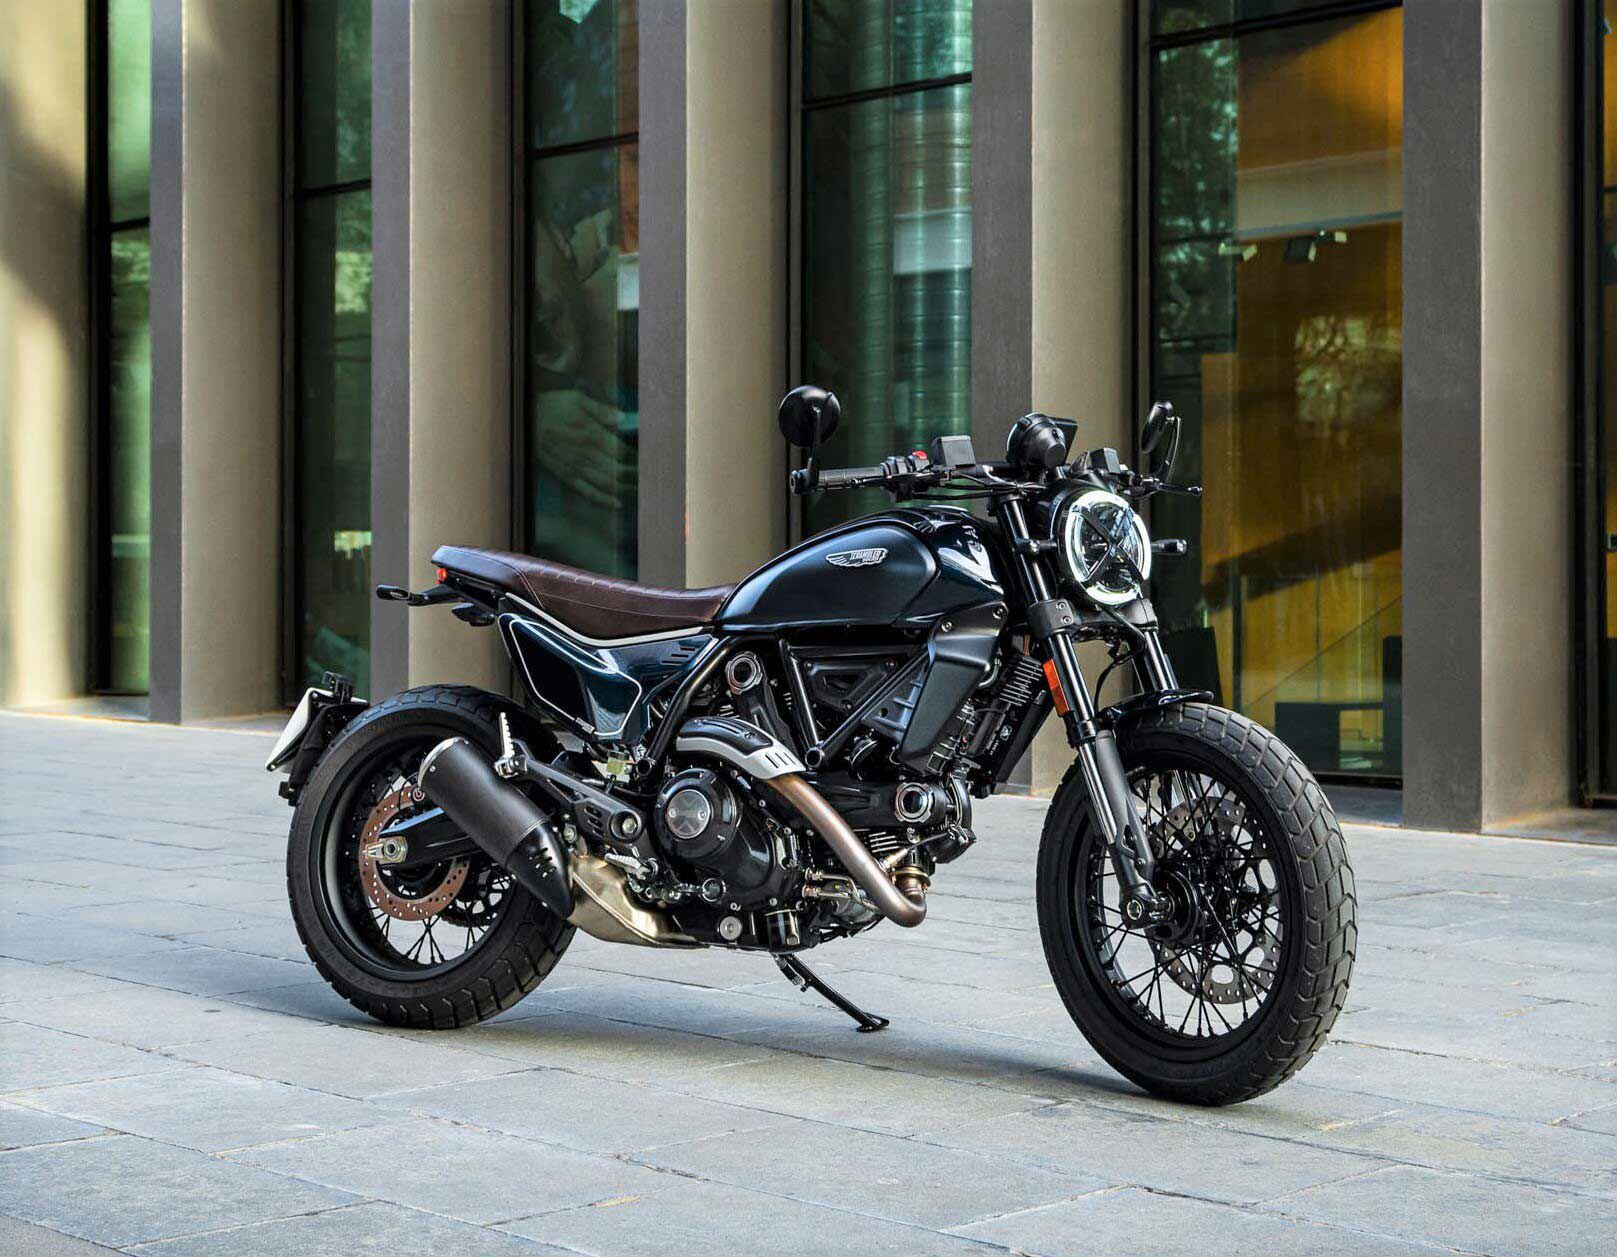 For more attitude, the Nightshift blacks out most of its parts, and like the Full Throttle, features side plates, a sporty front fender, and compact LED indicators.